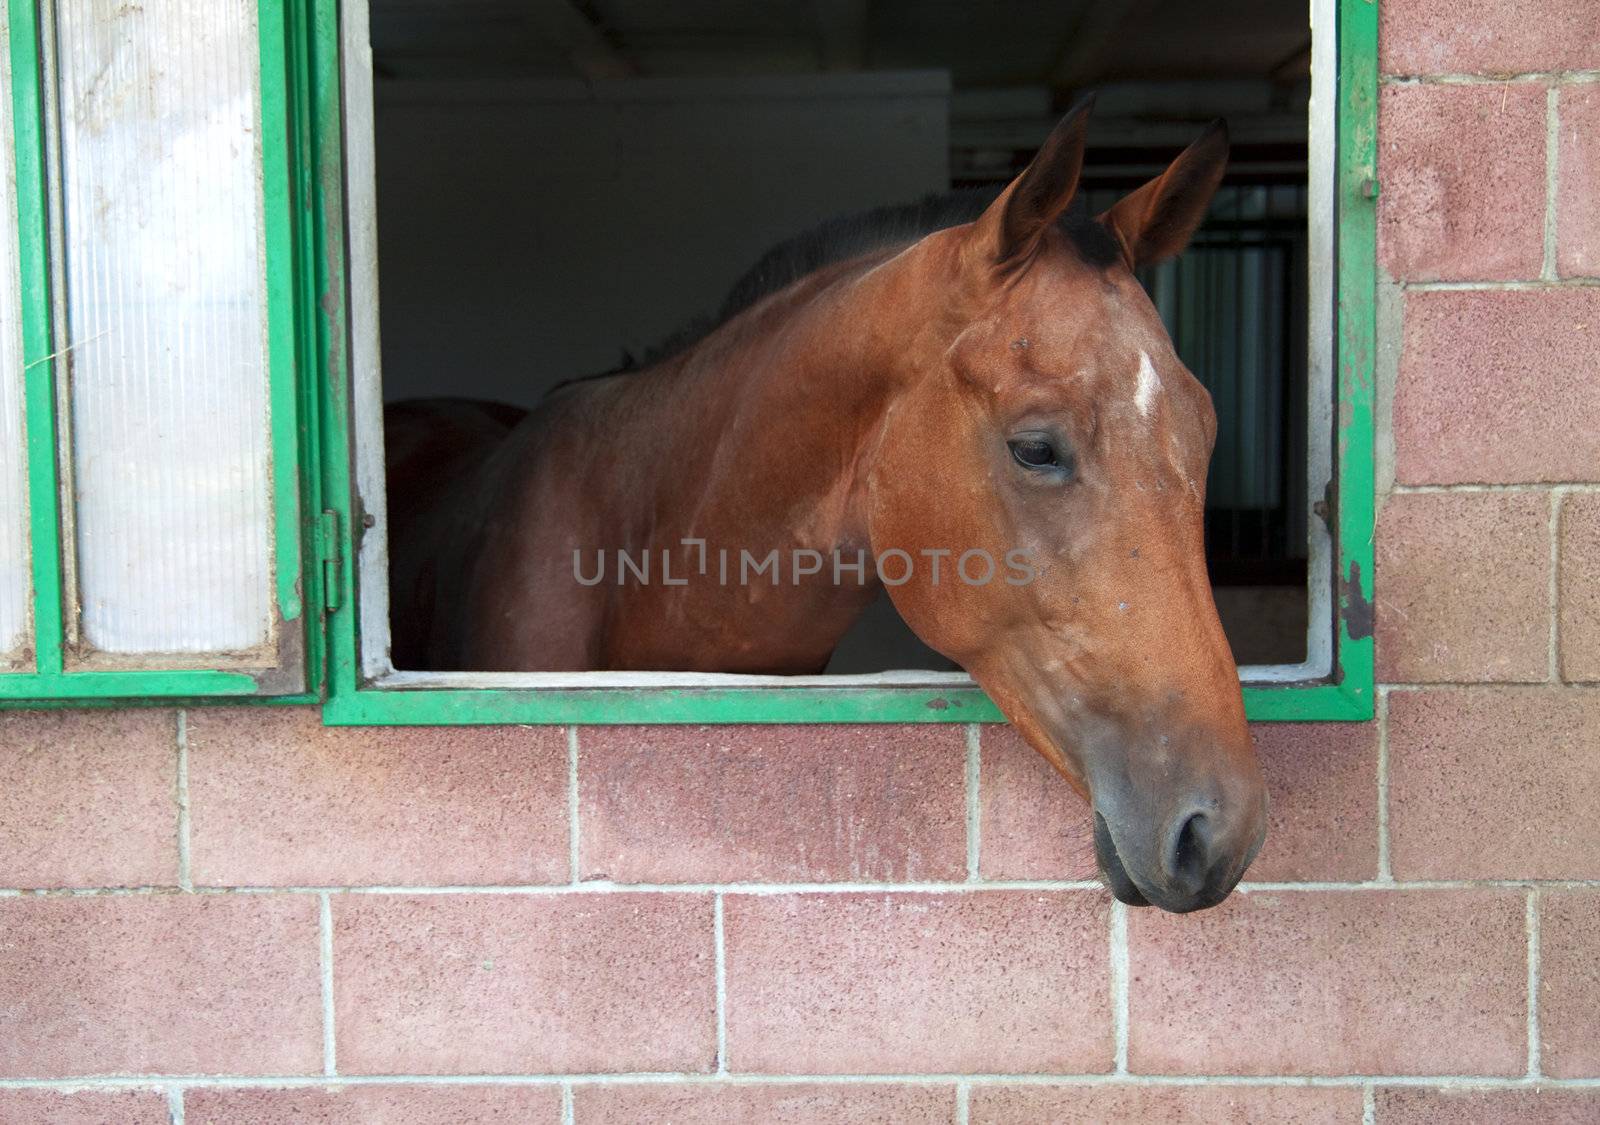 Portrait of a brown horse in a box
